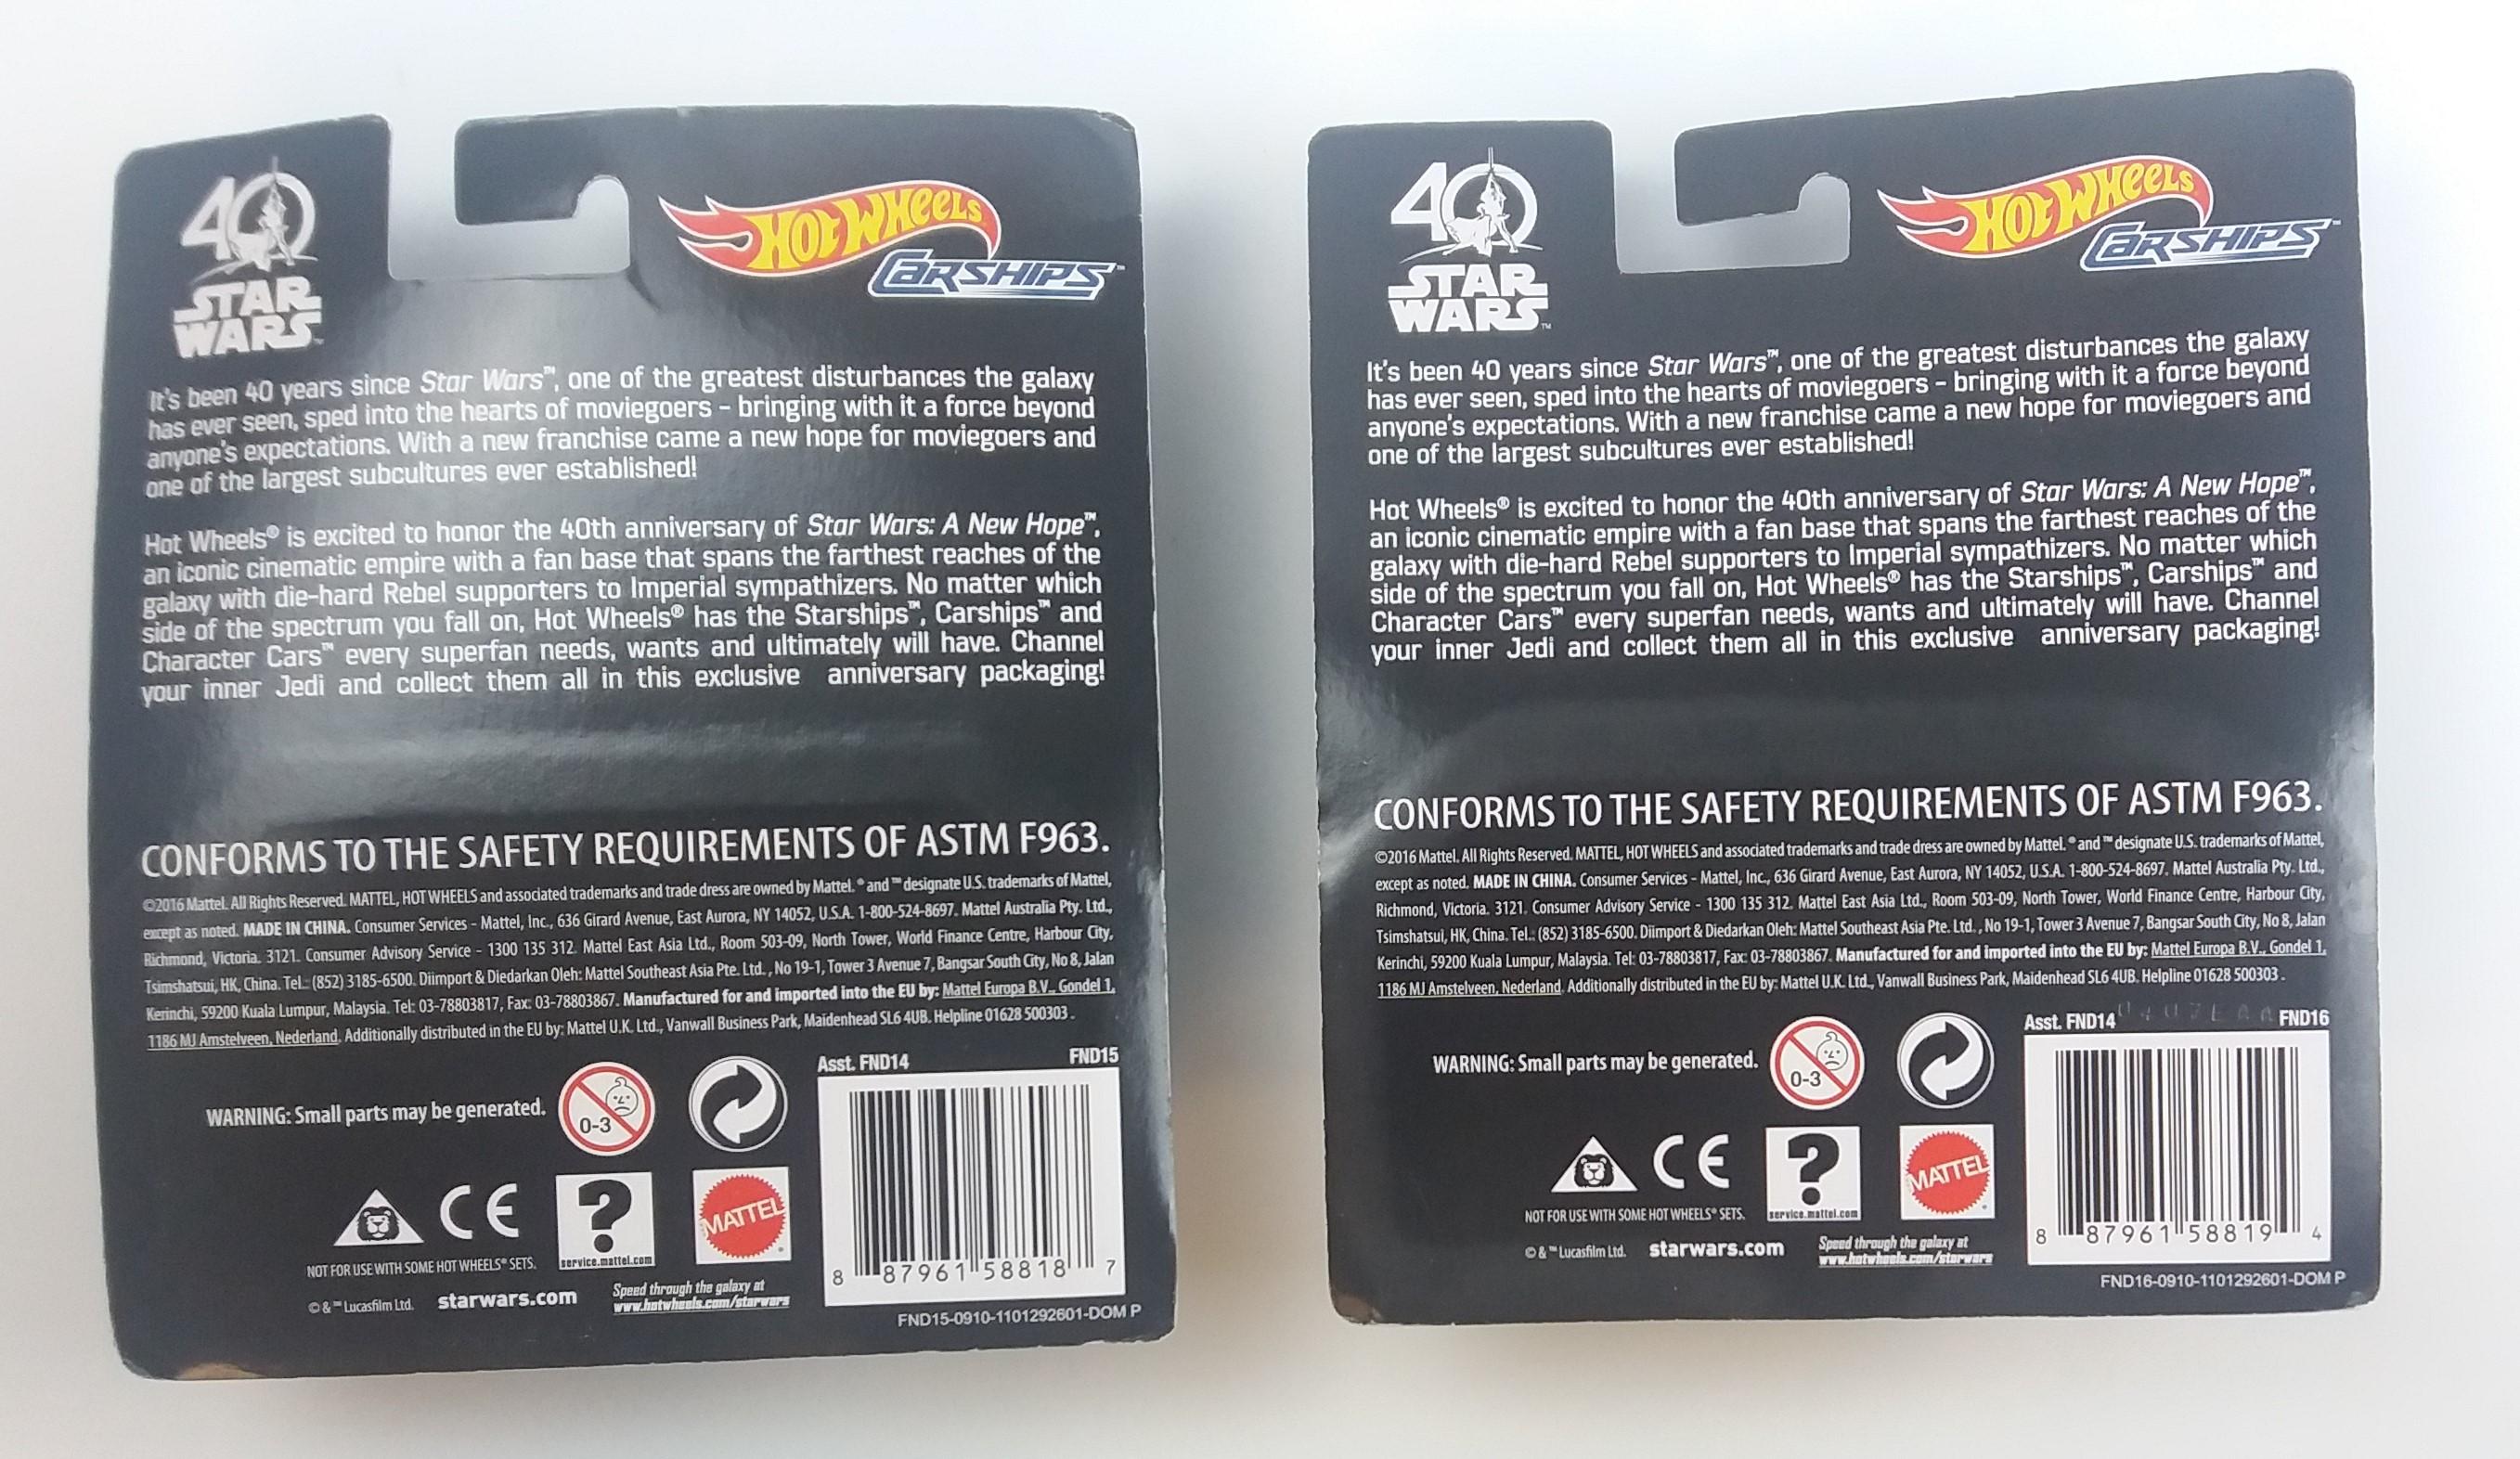 Millennium Falcon / X-Wing Hot Wheels Star Wars Carships Die Cast Collectible Vehicle